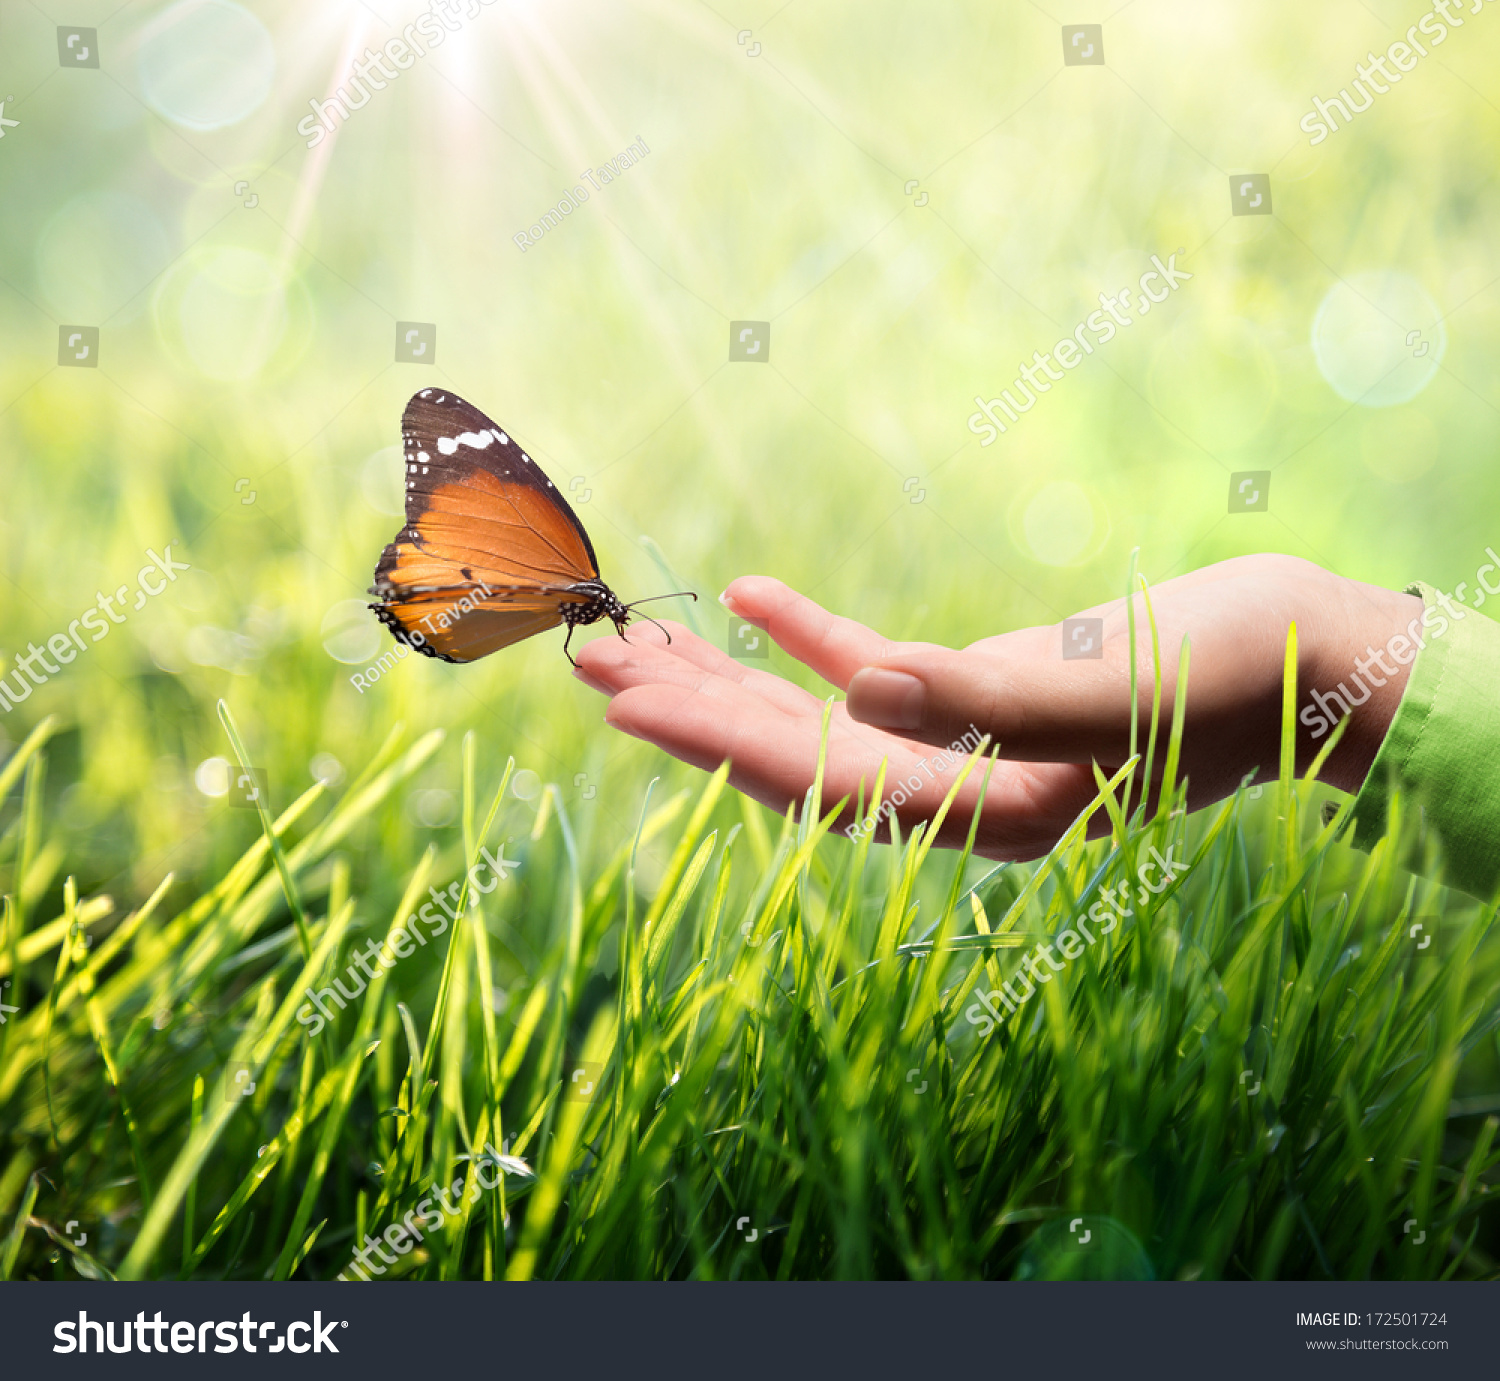 butterfly in hand on grass #172501724